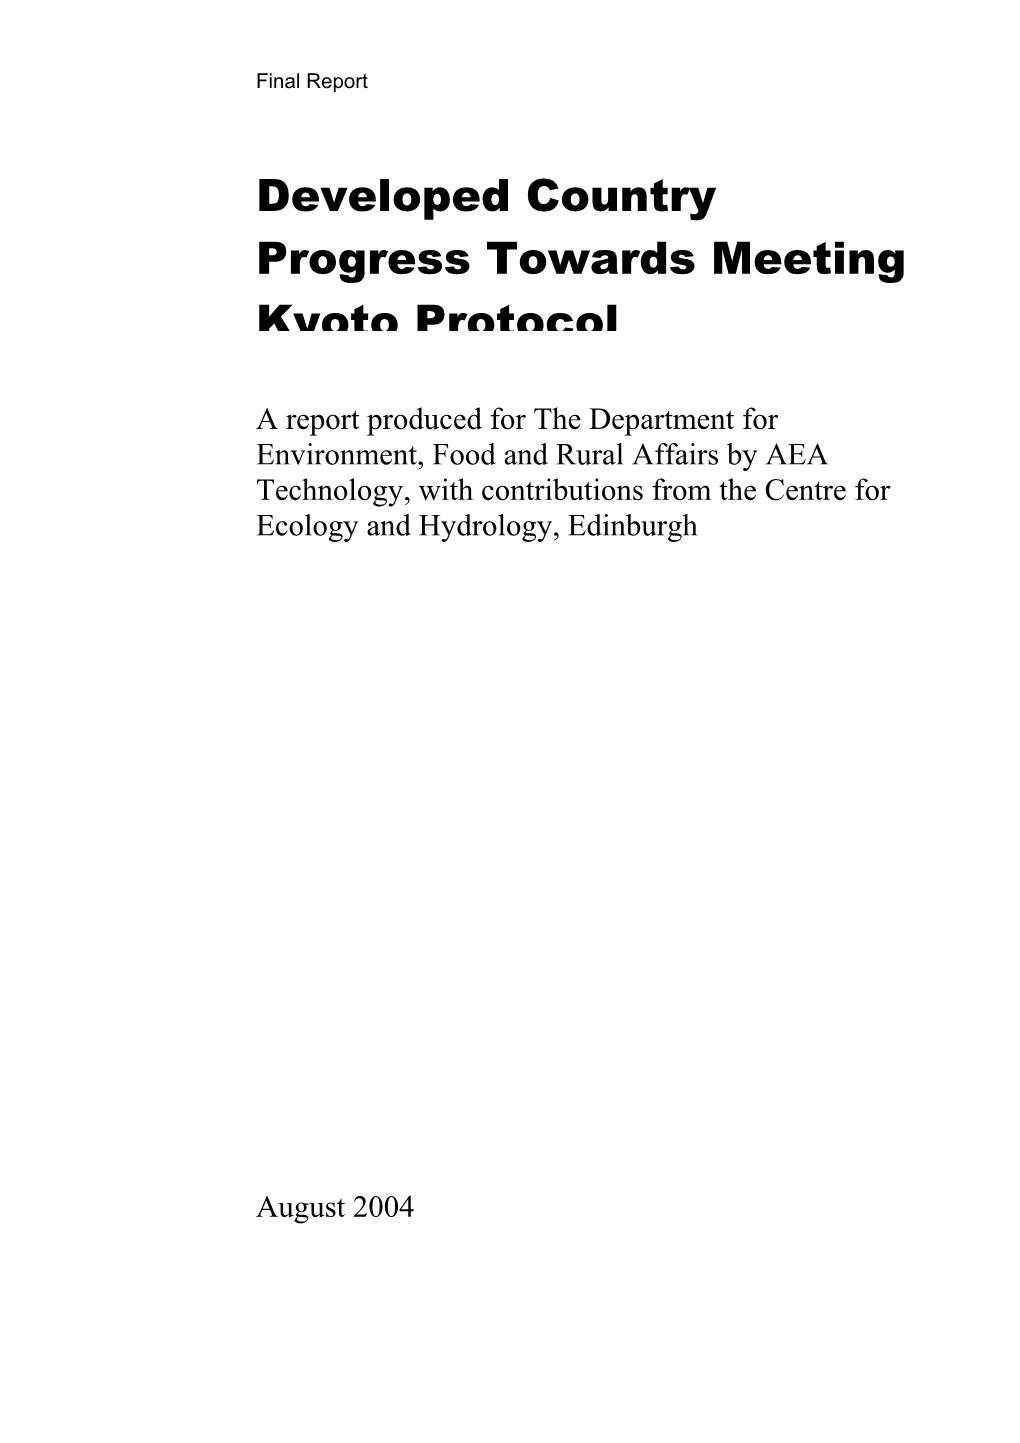 Developed Country Progress Towards Meeting Kyoto Protocol Commitments